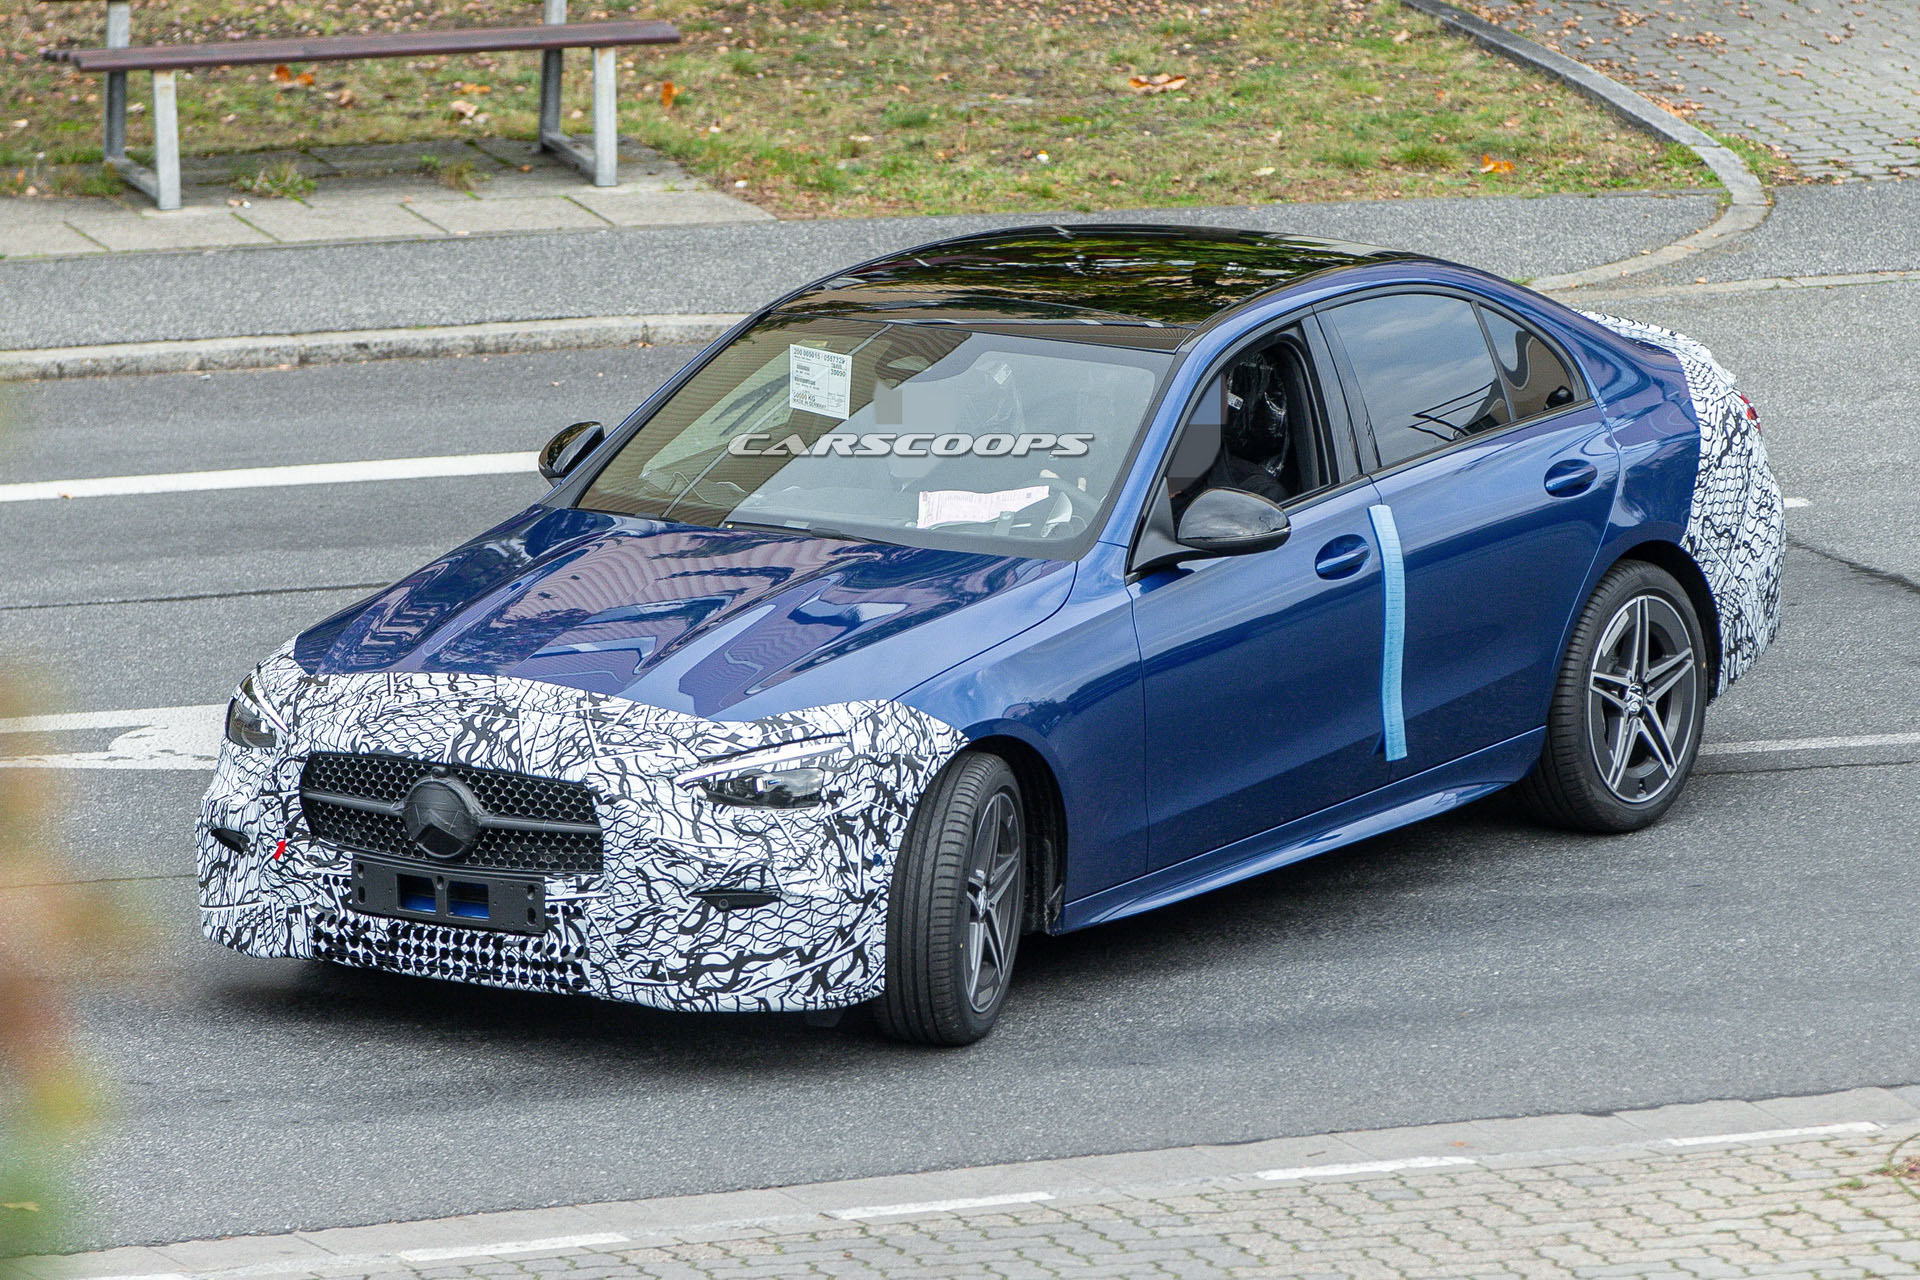 22 Mercedes Benz C Class Drops Most Of Its Camouflage To Reveal Elegant New Design Carscoops